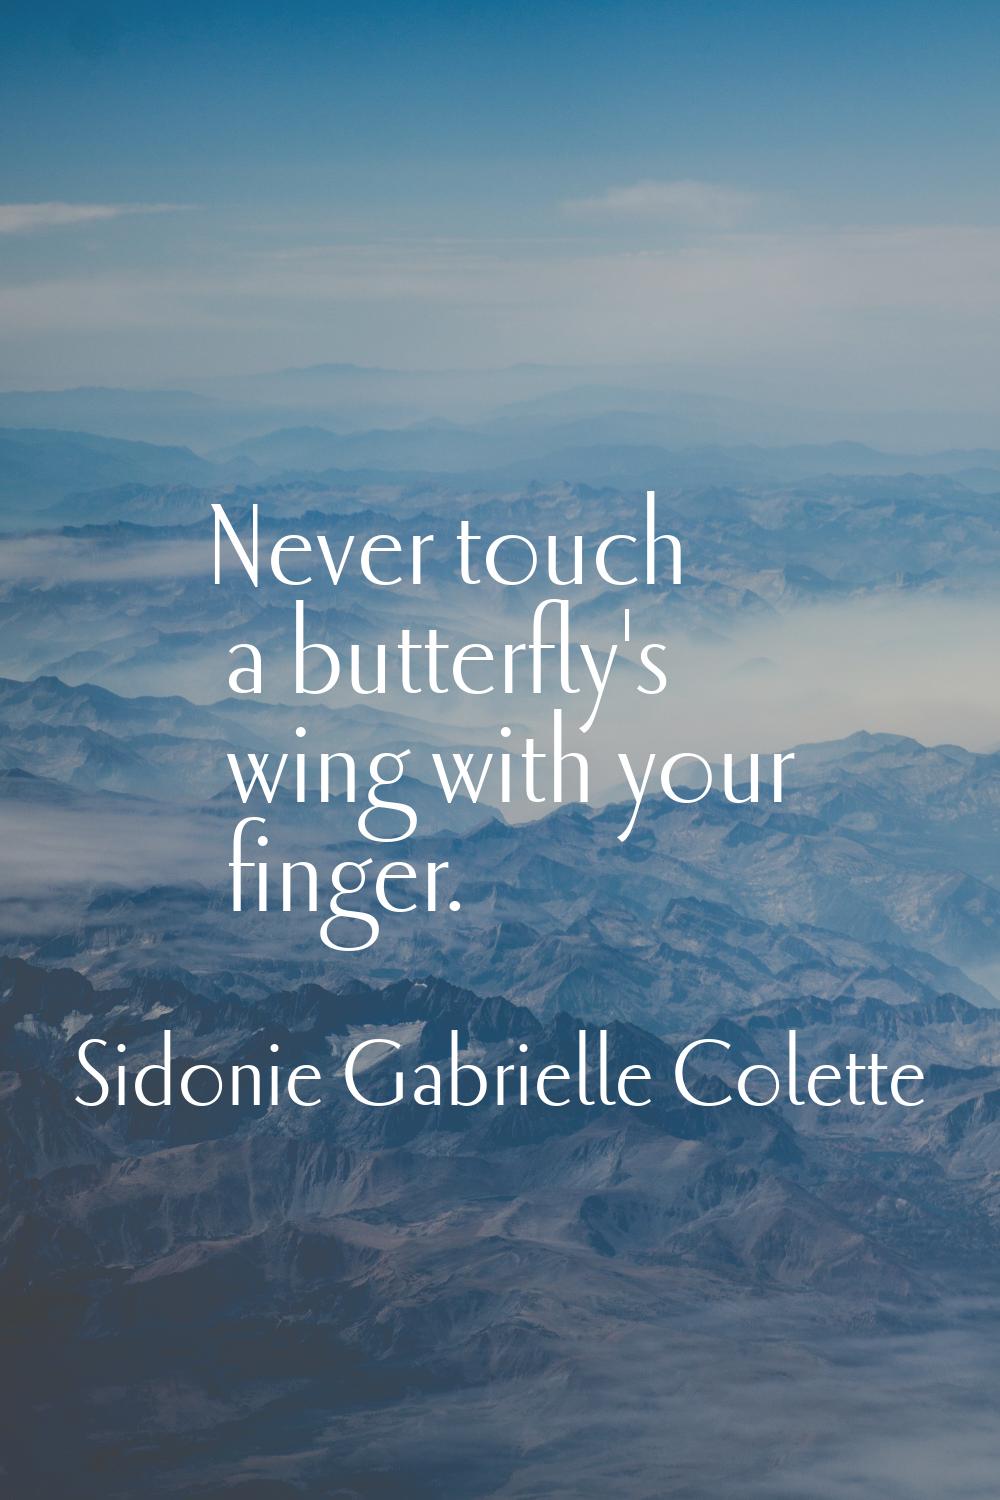 Never touch a butterfly's wing with your finger.